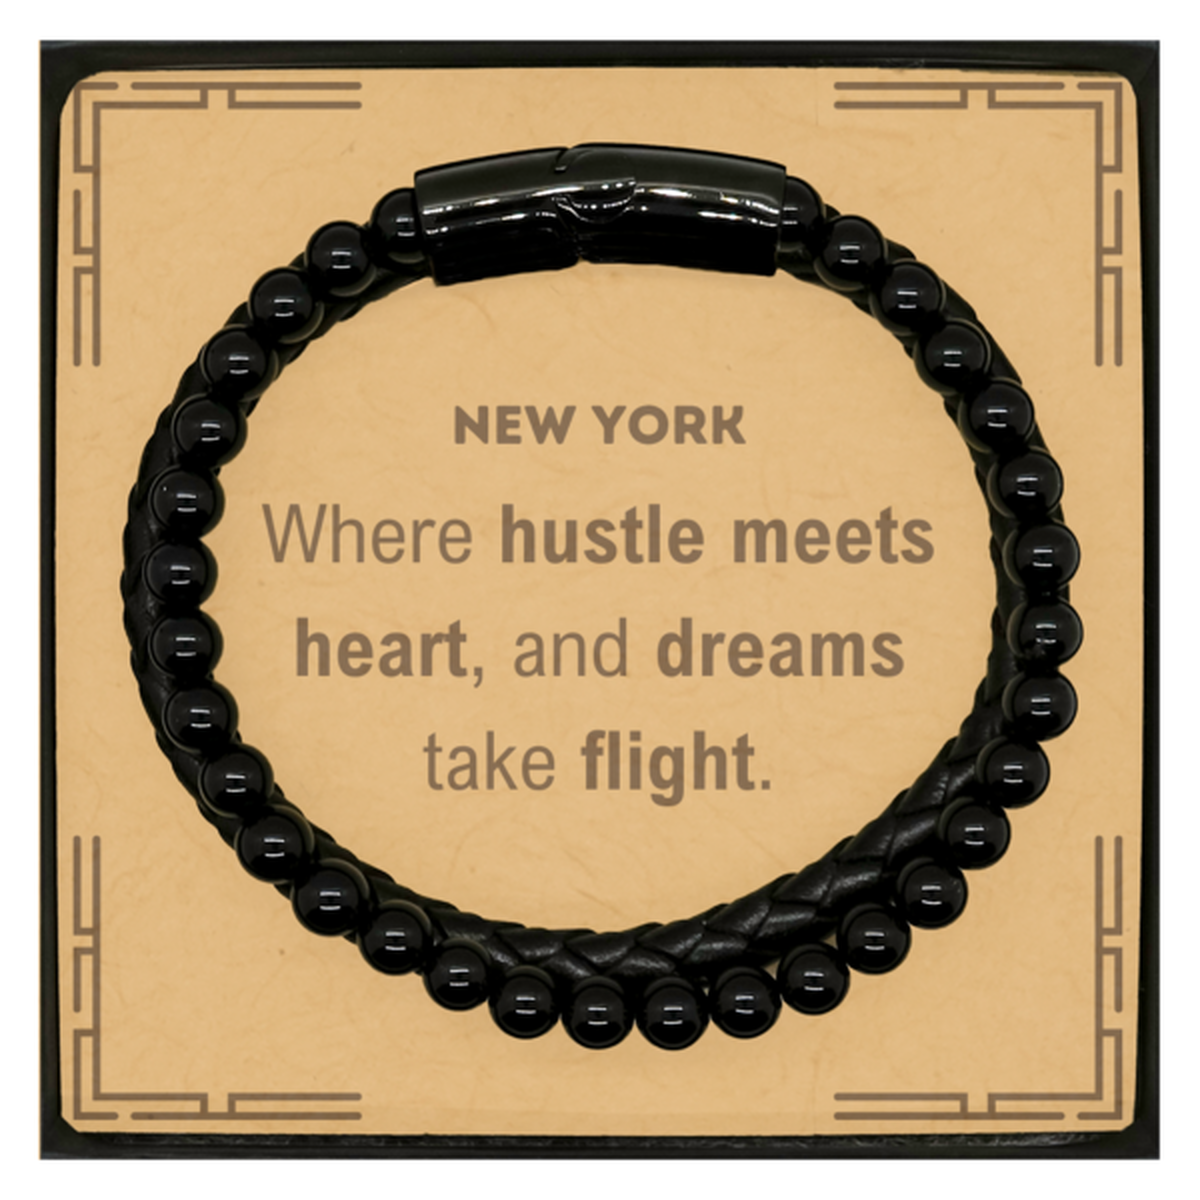 New York: Where hustle meets heart, and dreams take flight, New York Card Gifts, Proud New York Christmas Birthday New York Stone Leather Bracelets, New York State People, Men, Women, Friends